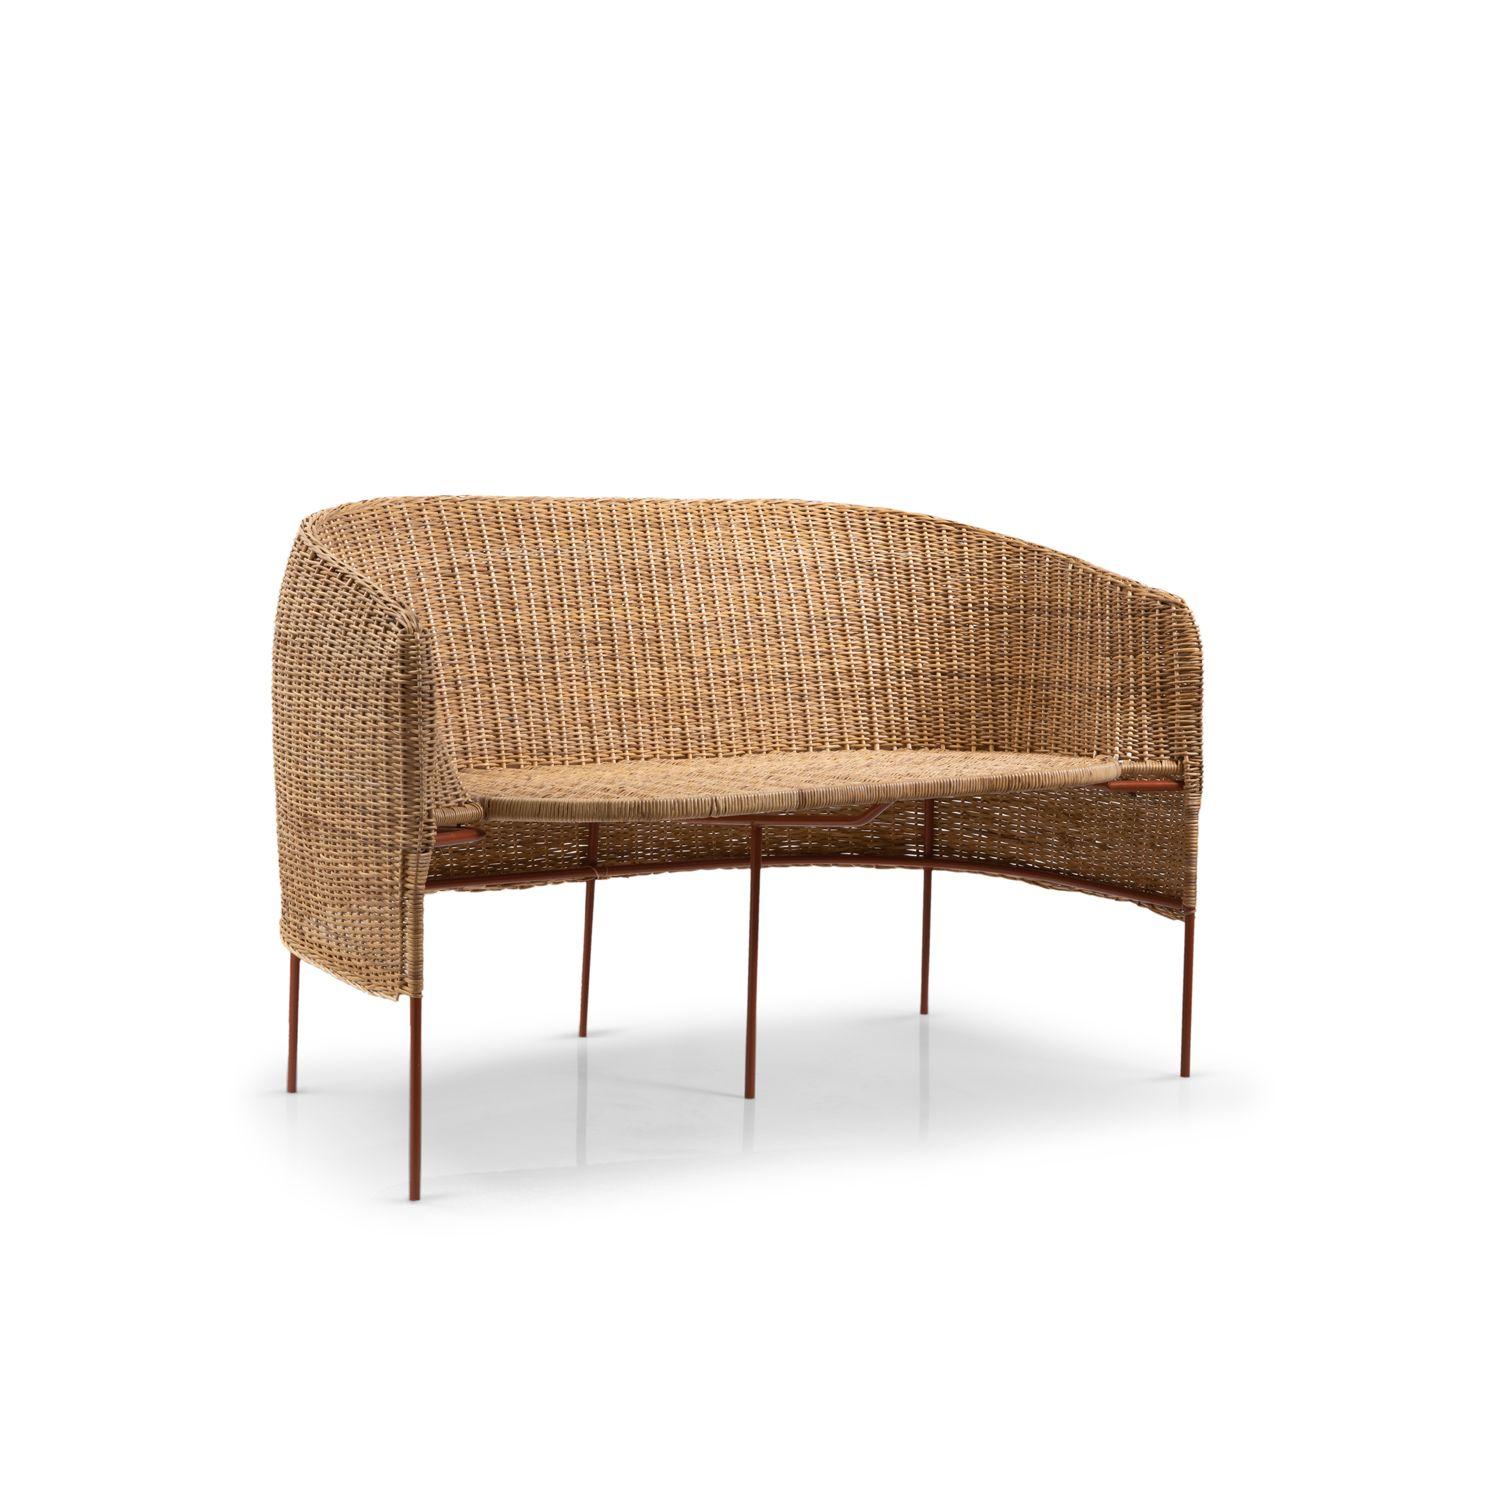 Caribe natural 2 seater bank by Sebastian Herkner
Materials: Wicker from Bejuco roots. Galvanized and powder-coated tubular steel frame.
Technique: Weaved by local craftspeople in Colombia. 
Dimensions: W 112.3 x D 69.6 x H 72 cm 
Available in